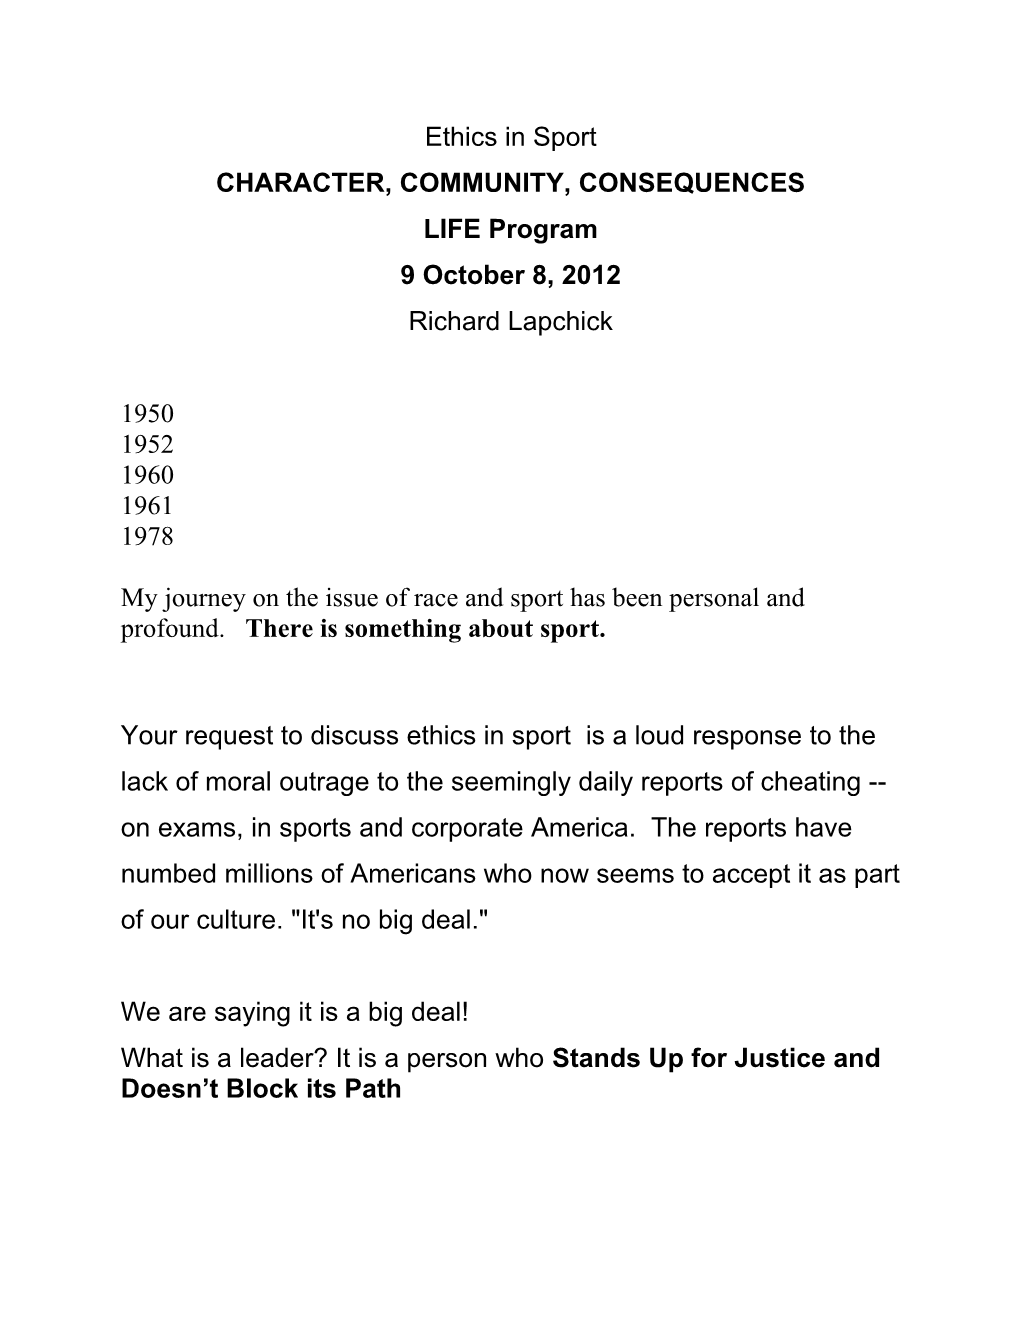 Character, Community, Consequences